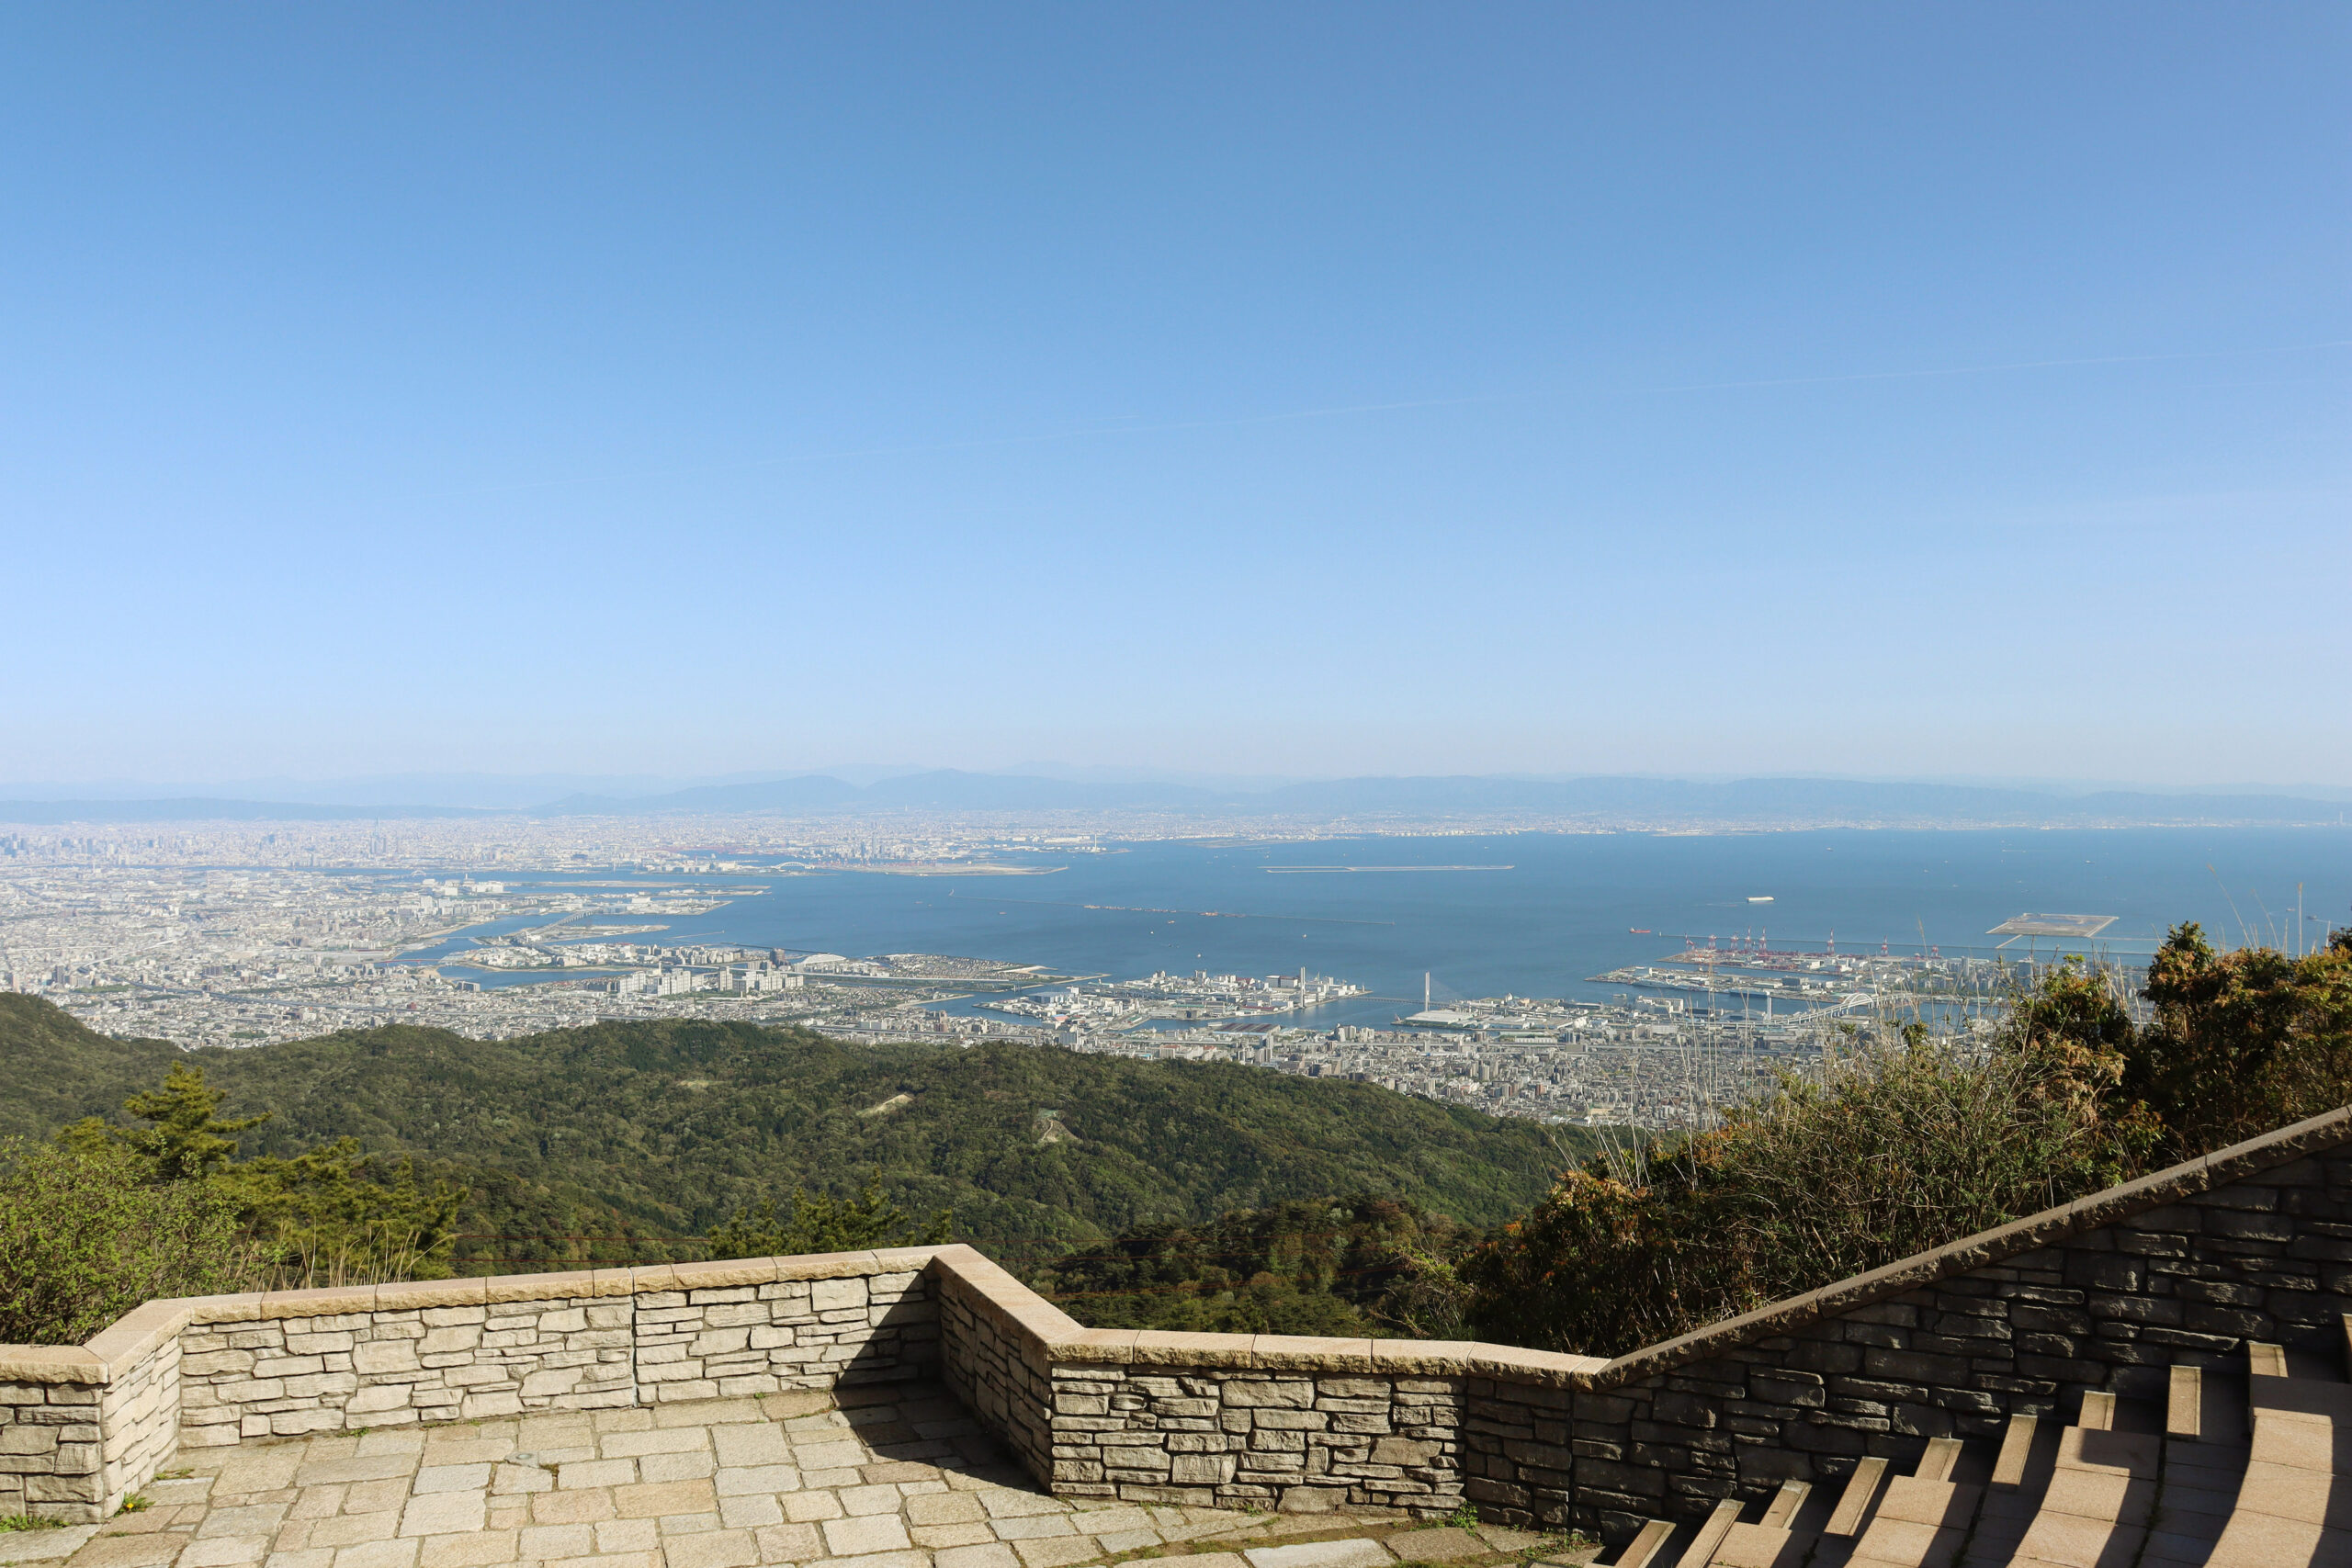 Head to Rokko Garden Terrace during Golden Week! Enjoy the spectacular views, local Mount Rokko cuisine, and the popular experiential art event!